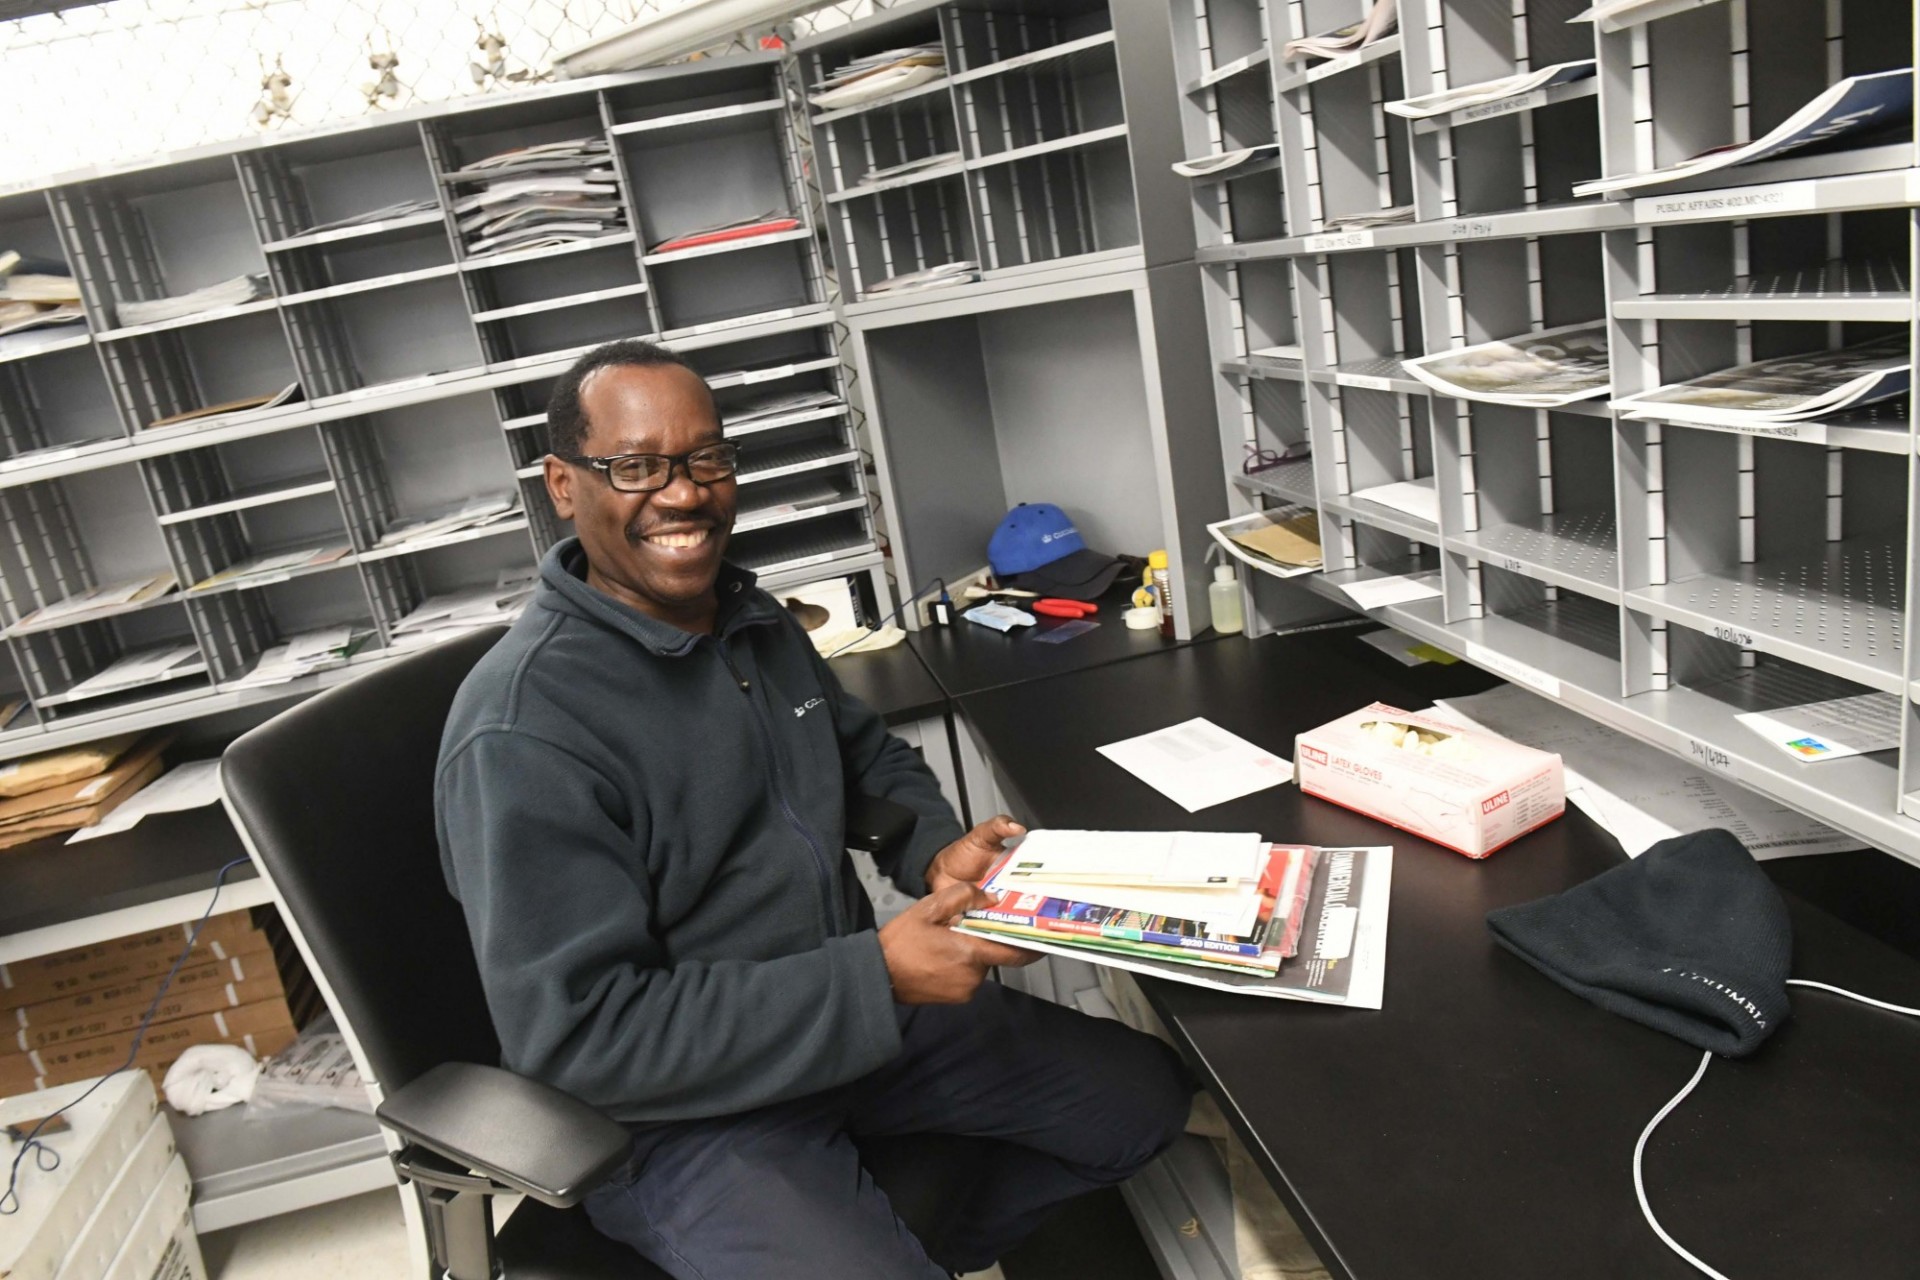 A man with black glasses and a grey jacket sits in a mail room holding a stack of mail.